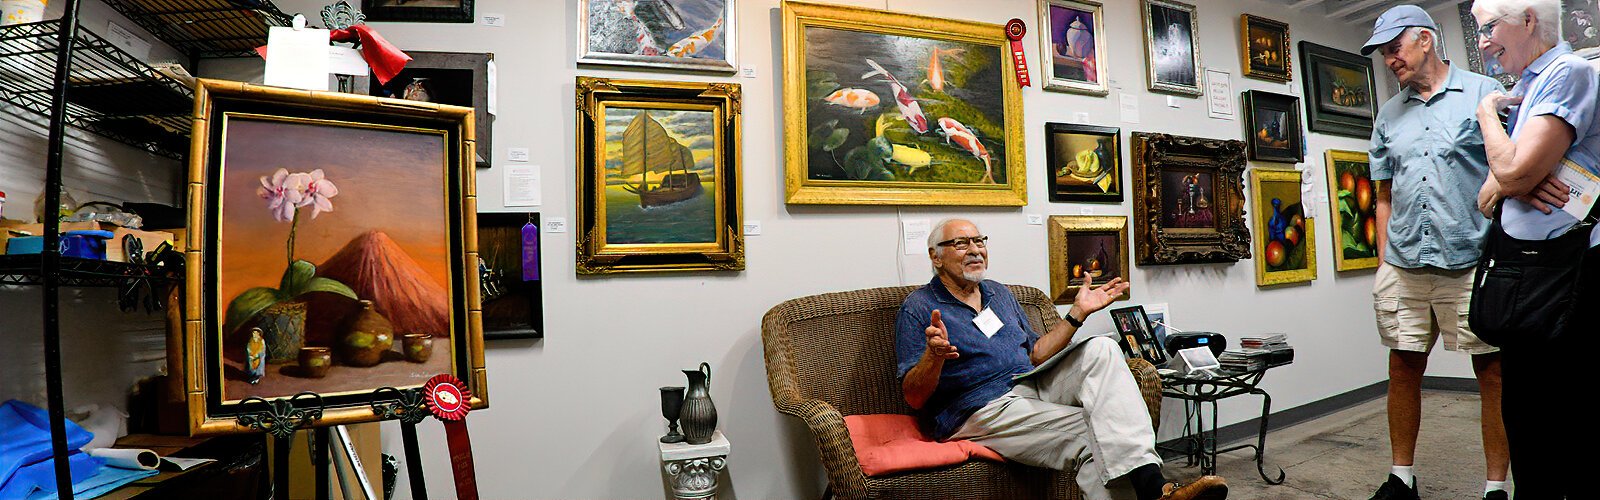  Artist Don Silvestri of Silvestri Fine Art welcomes guests to his studio at ArtsXchange during the Second Saturday ArtWalk.